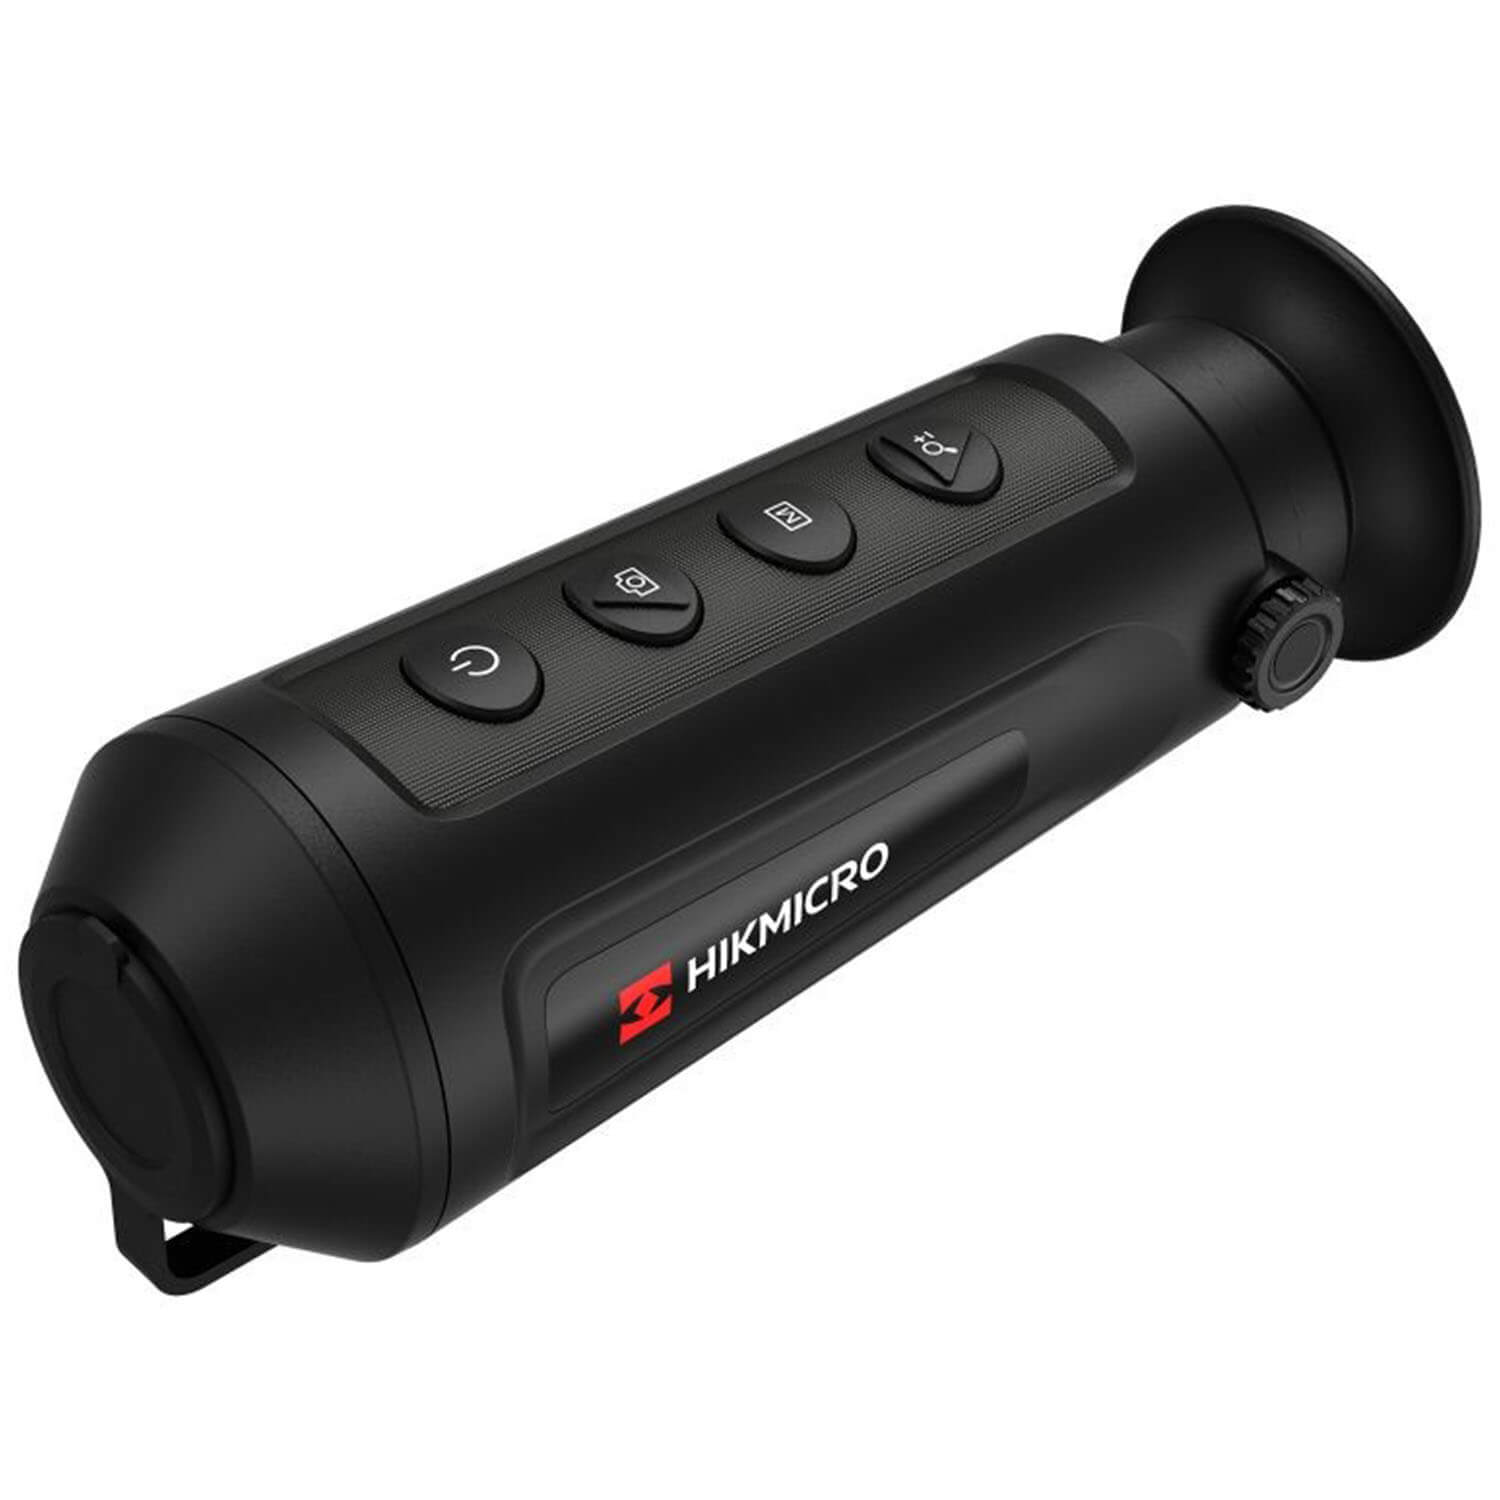 Hikmicro thermal device lynx LE15S - Night Vision Devices